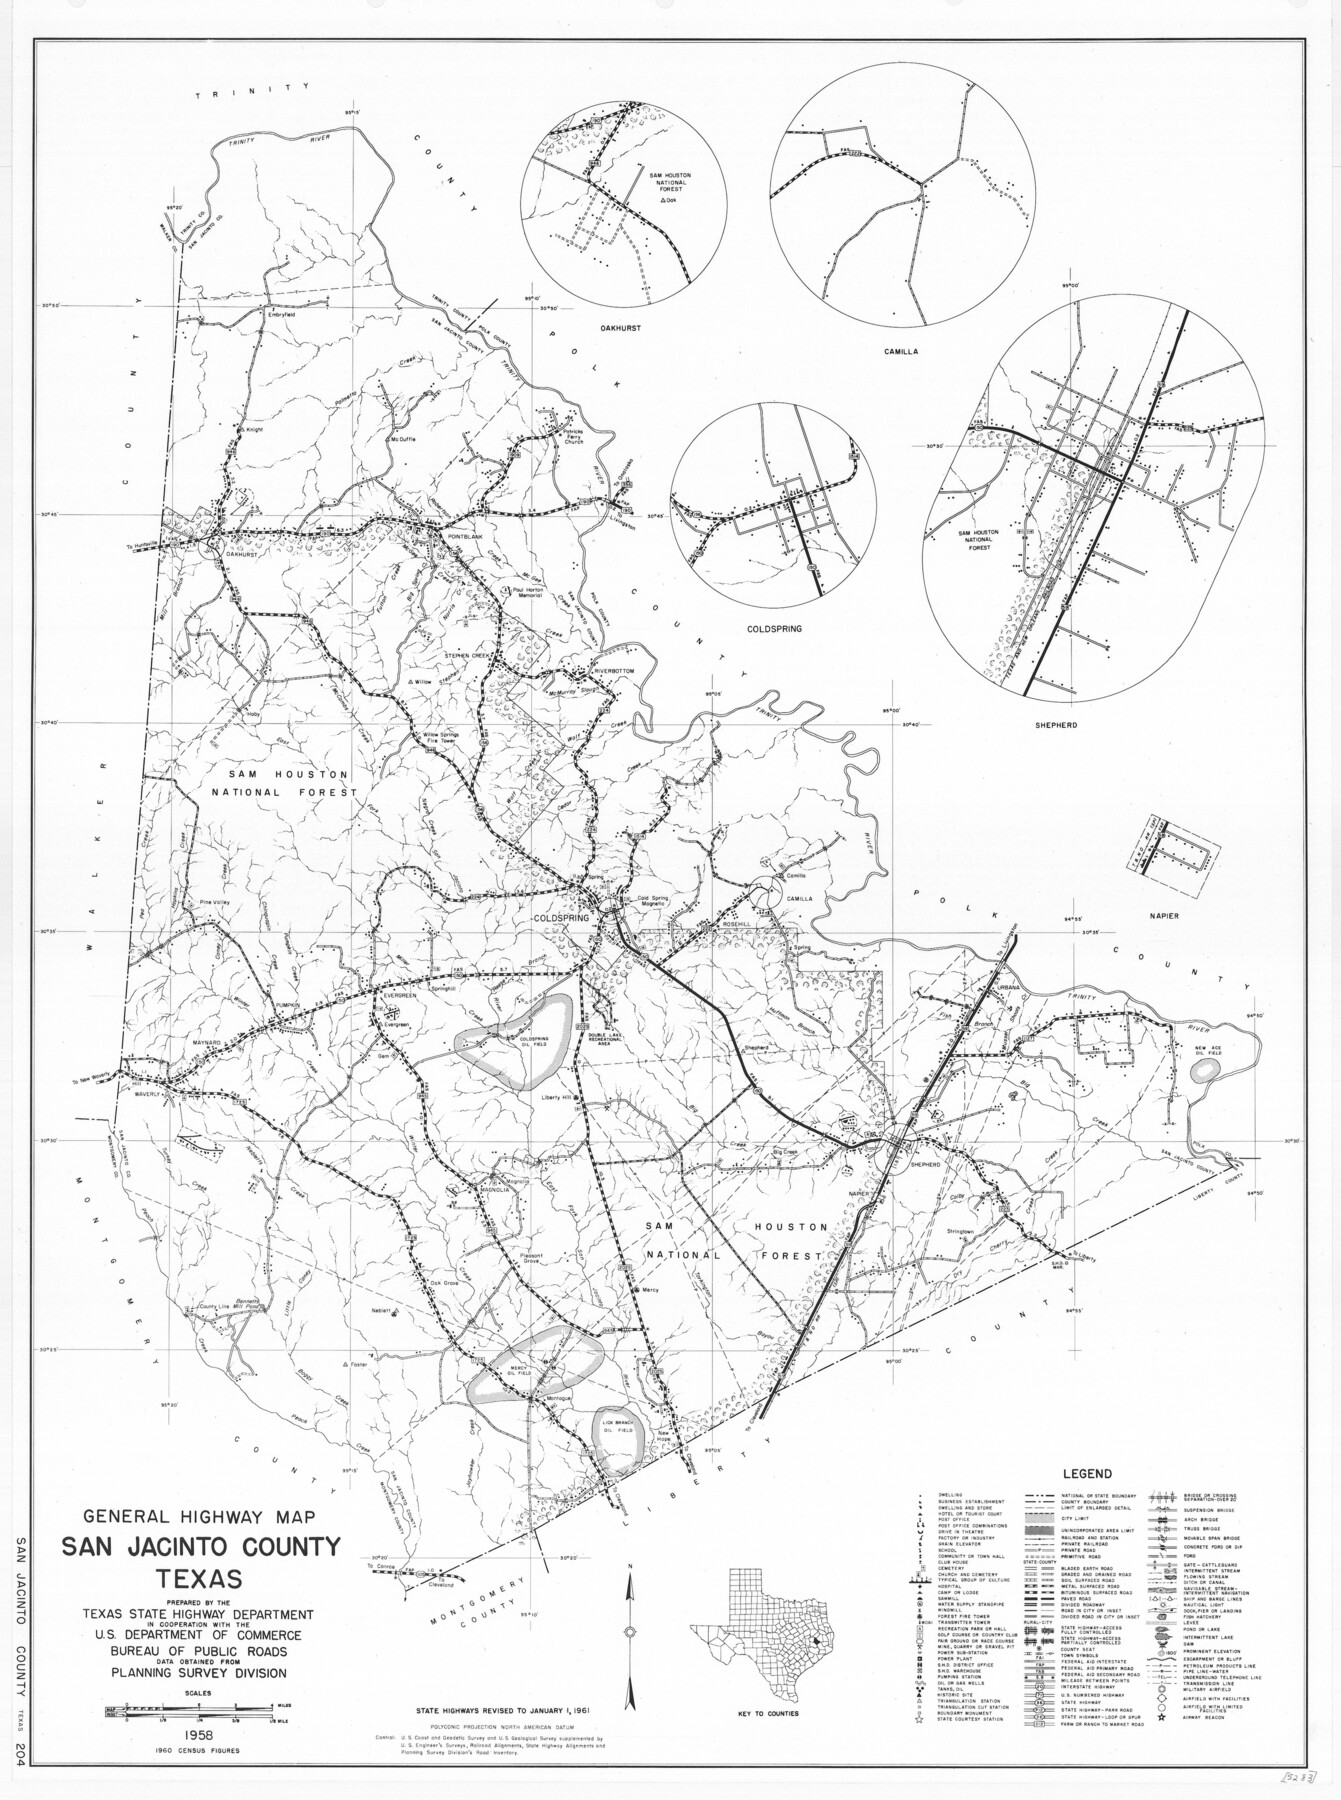 79646, General Highway Map, San Jacinto County, Texas, Texas State Library and Archives